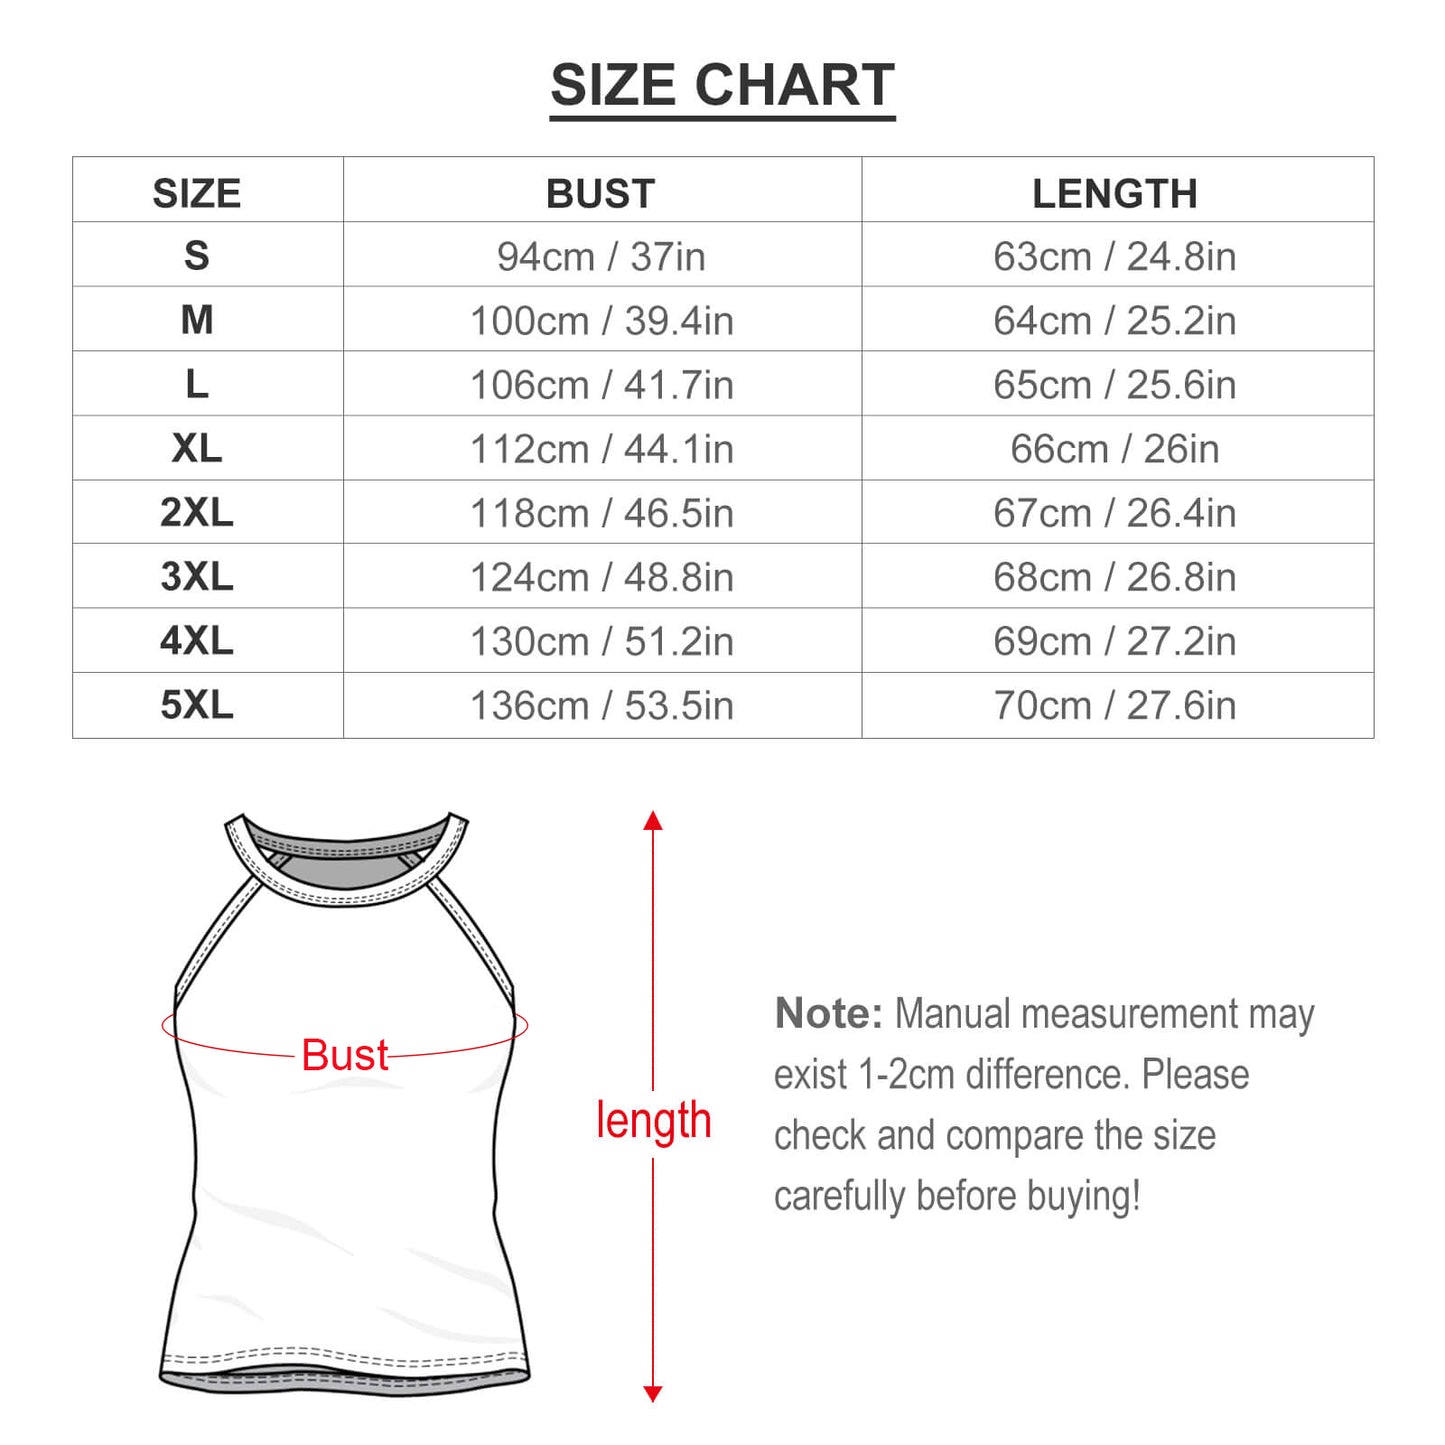 Character Donuts Women's Round-Neck Vest Tank Top